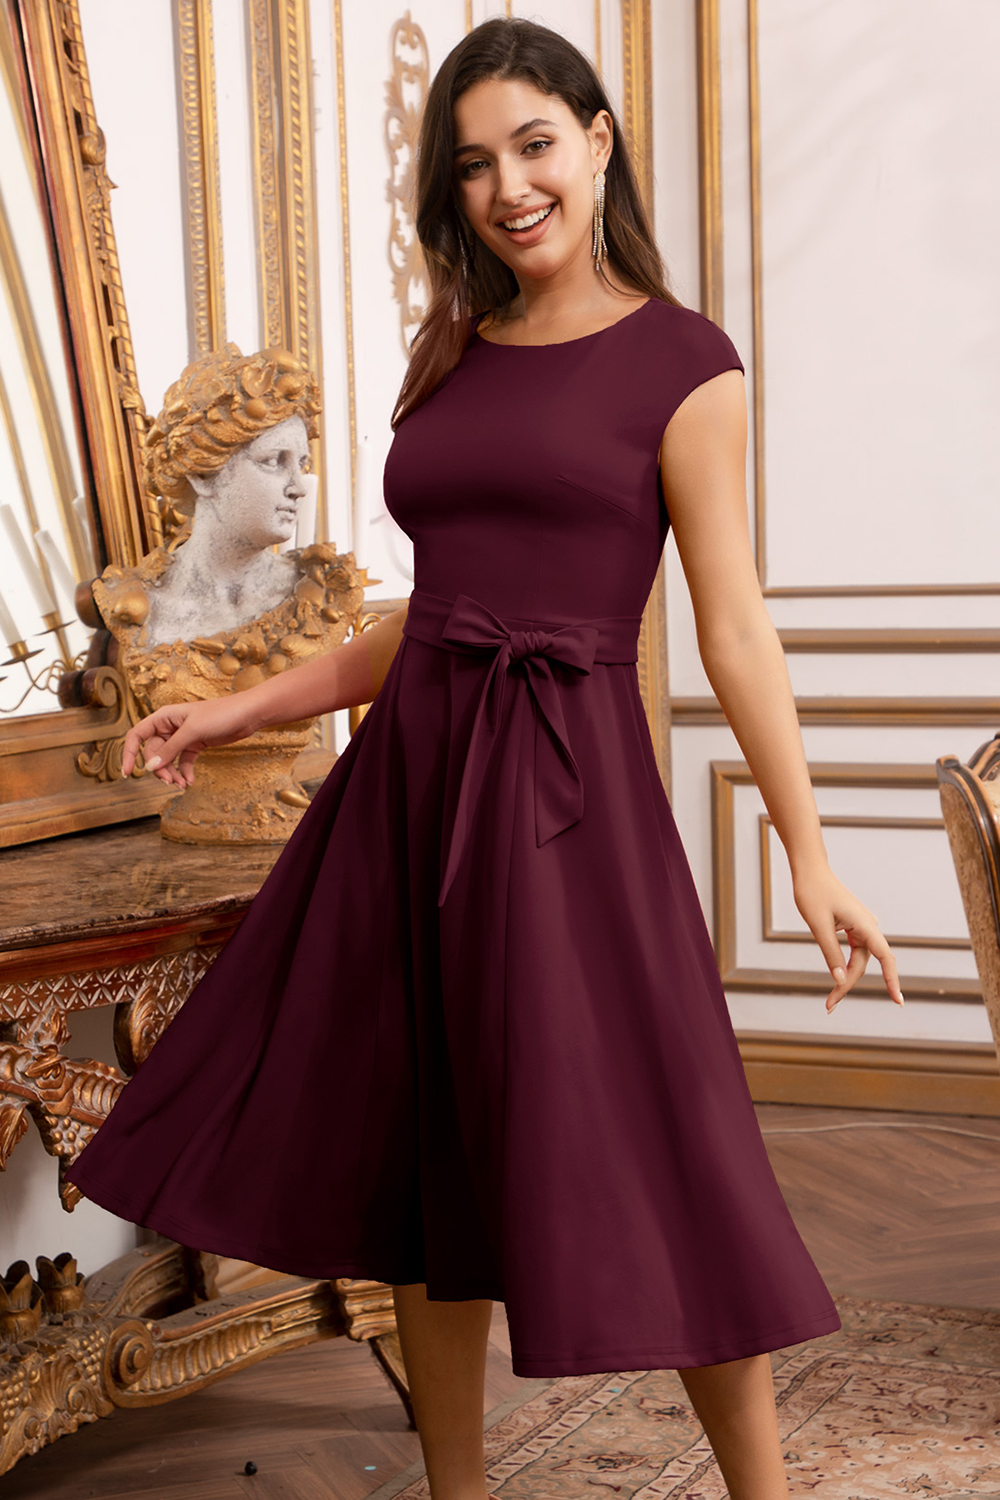 A-Line Knee-Length Burgundy Cocktail Dress with Cap Sleeves, Vintage Style, Unique and Elegant